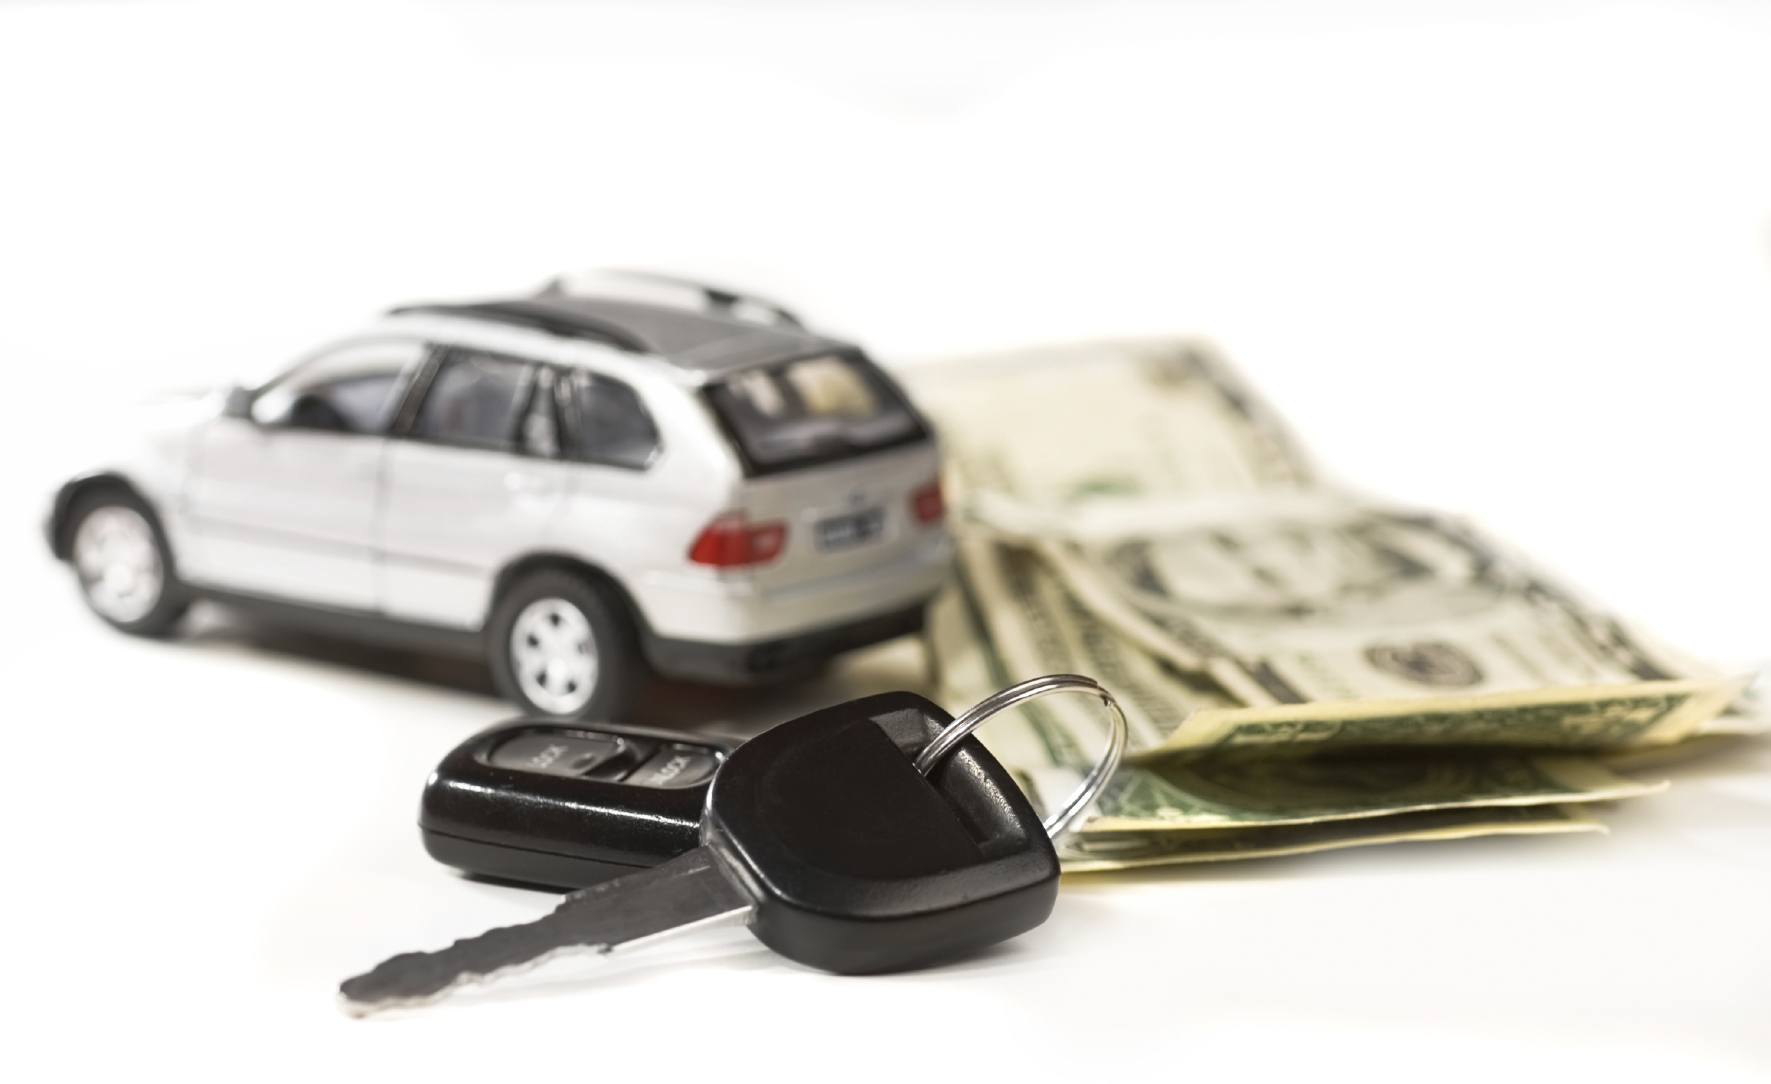 How to Buy a Car at Auction Online